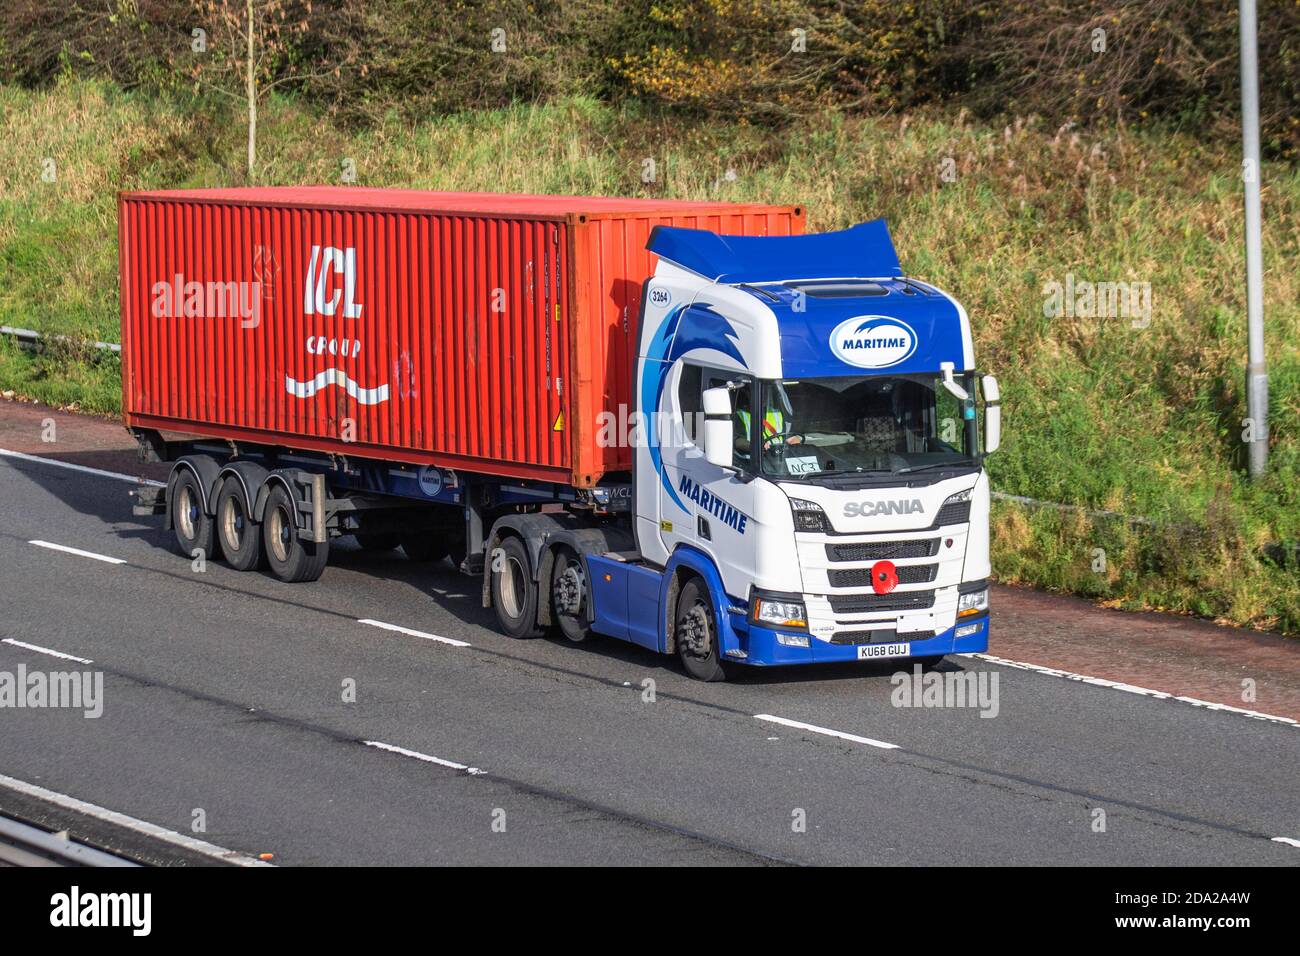 APL Maritime Haulage delivery trucks, lorry, transportation, truck, cargo carrier, Scania vehicle, European commercial transport, industry, M61 at Manchester, UK Stock Photo